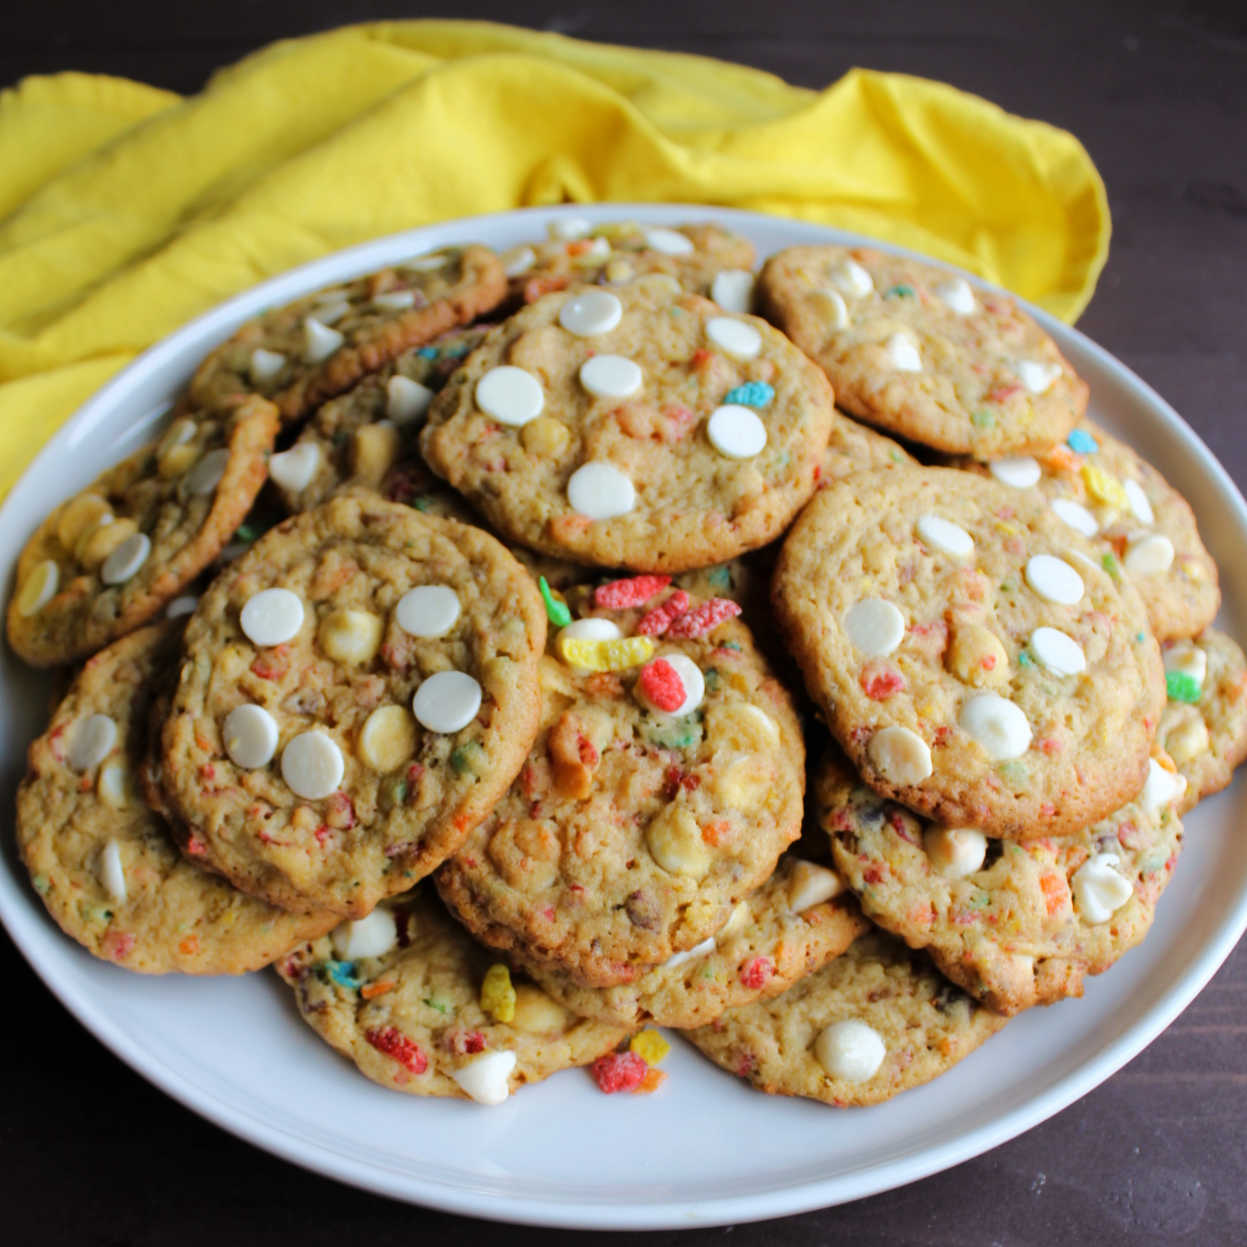 Plate piled high with fruity pebble cookies with white chocolate chips.